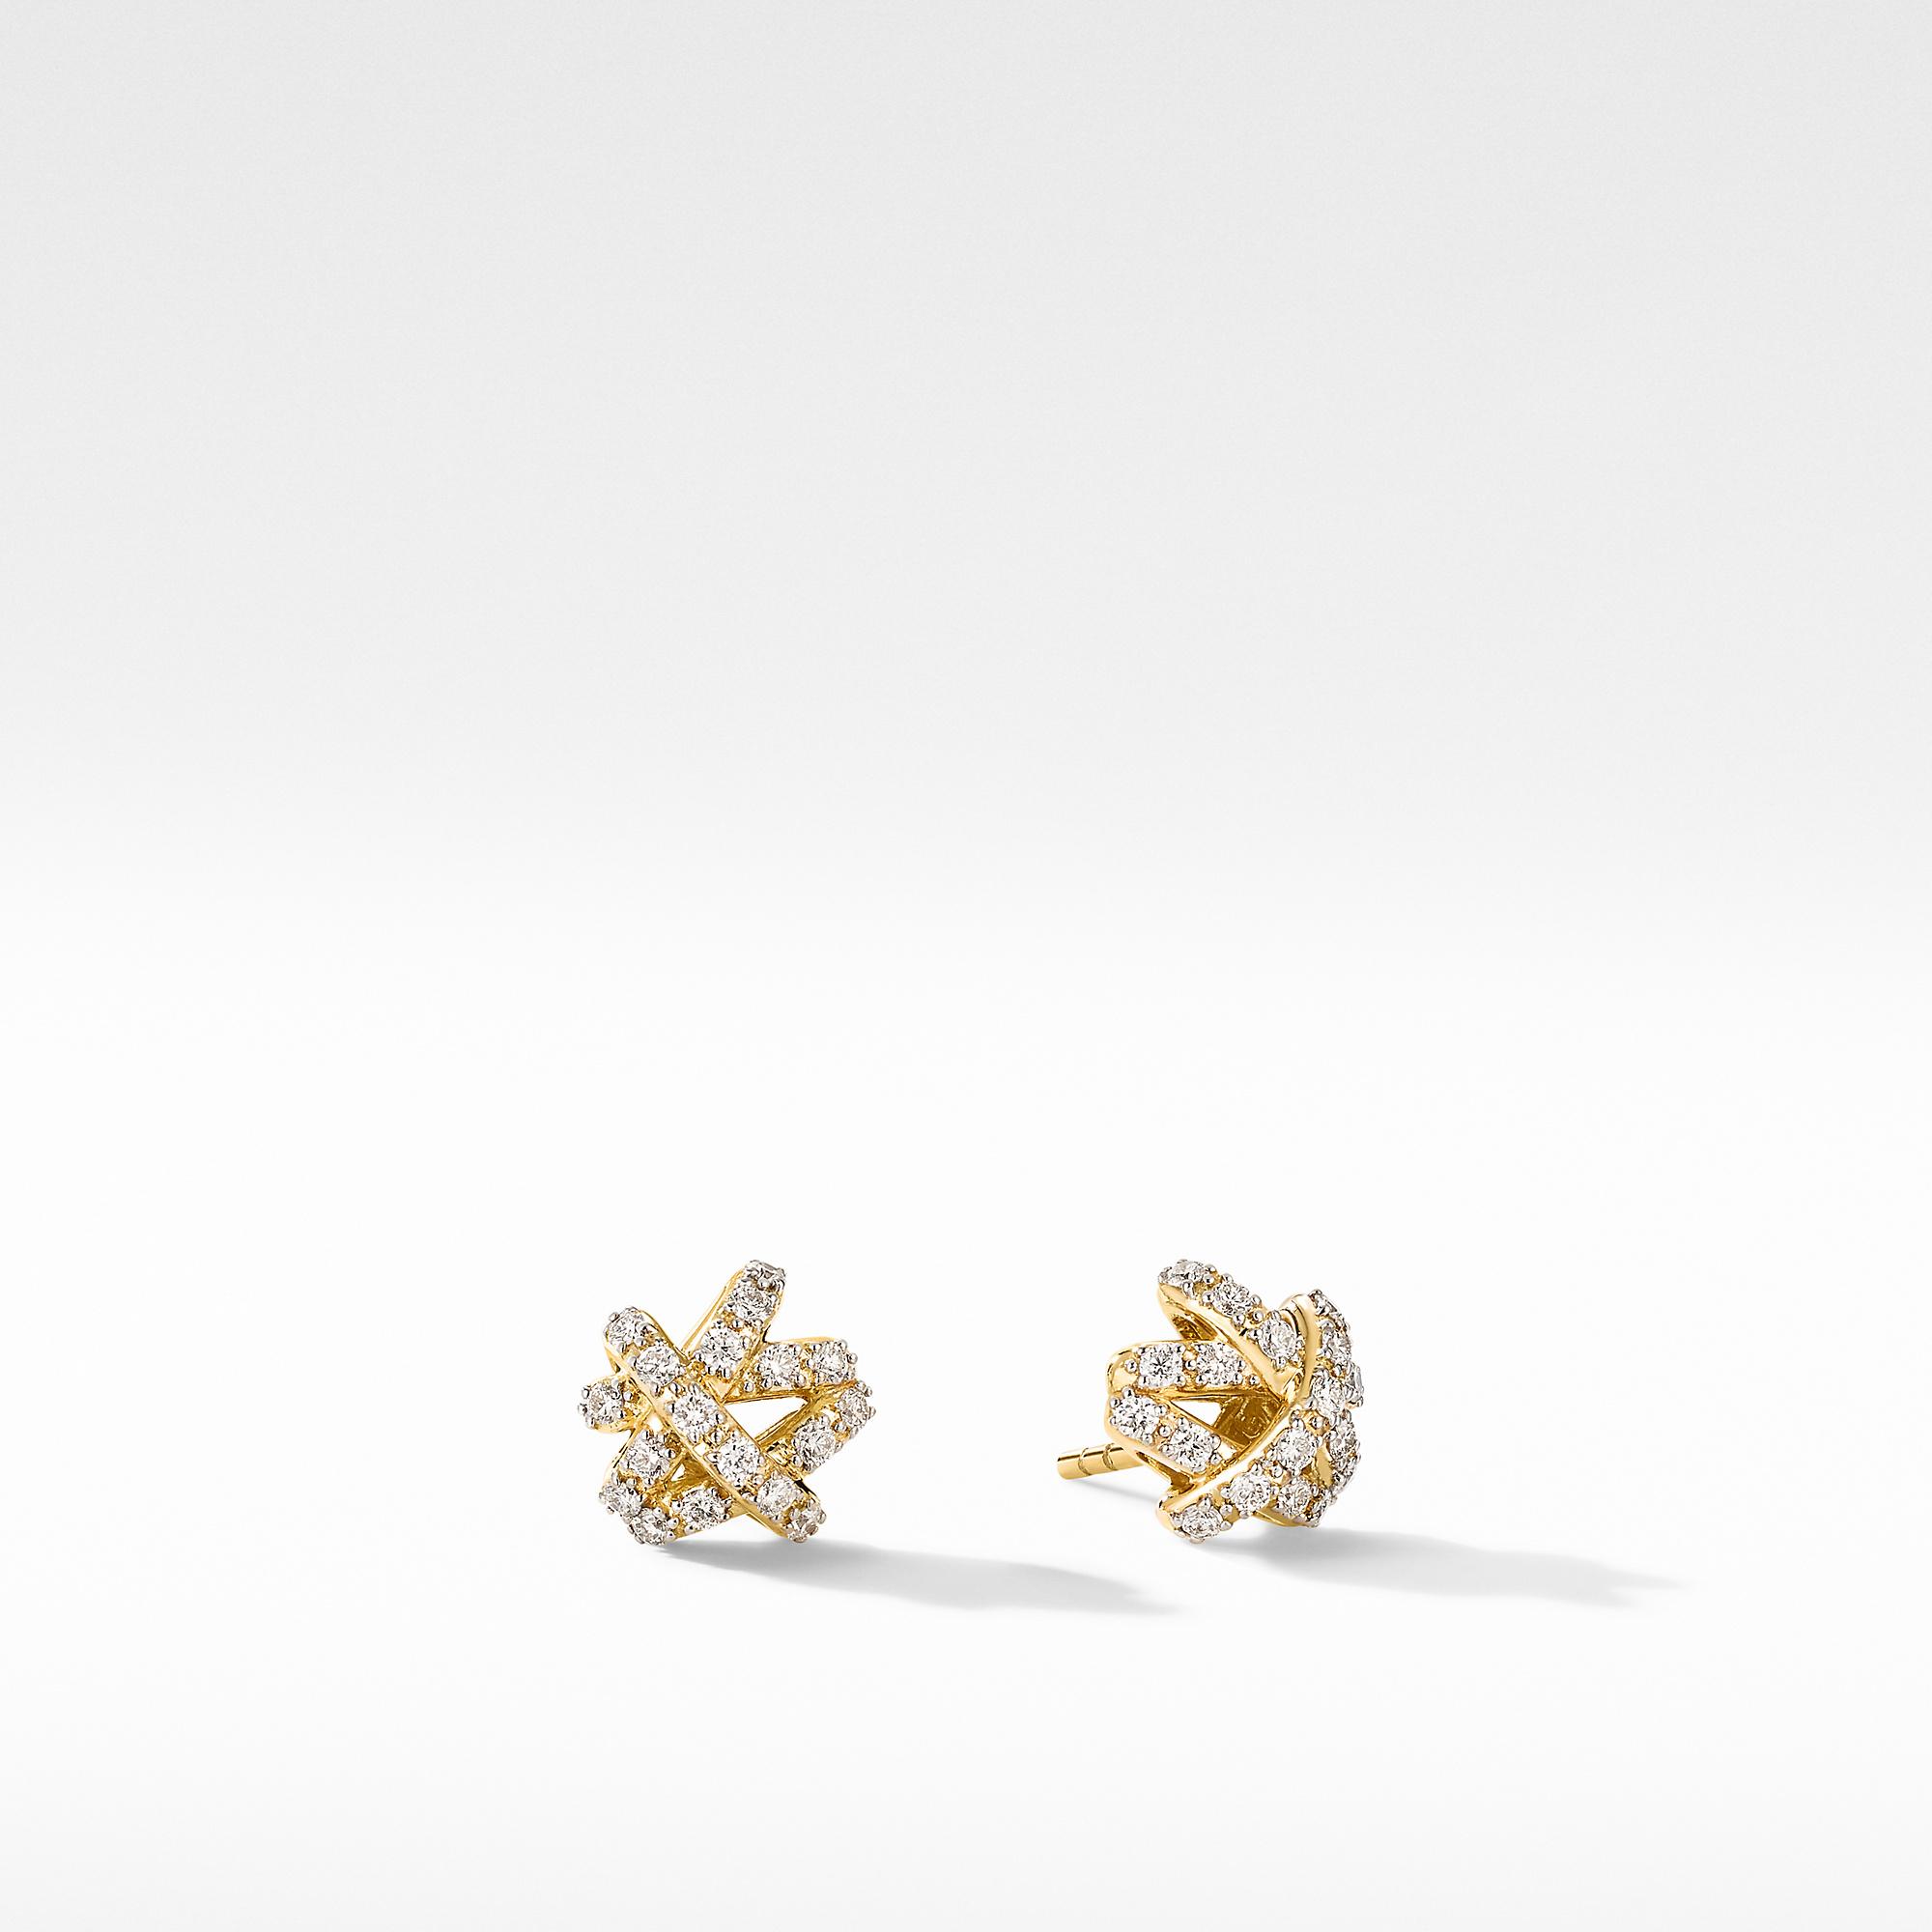 David Yurman Crossover Stud Earrings in 18k Yellow Gold with Full Pave Diamonds